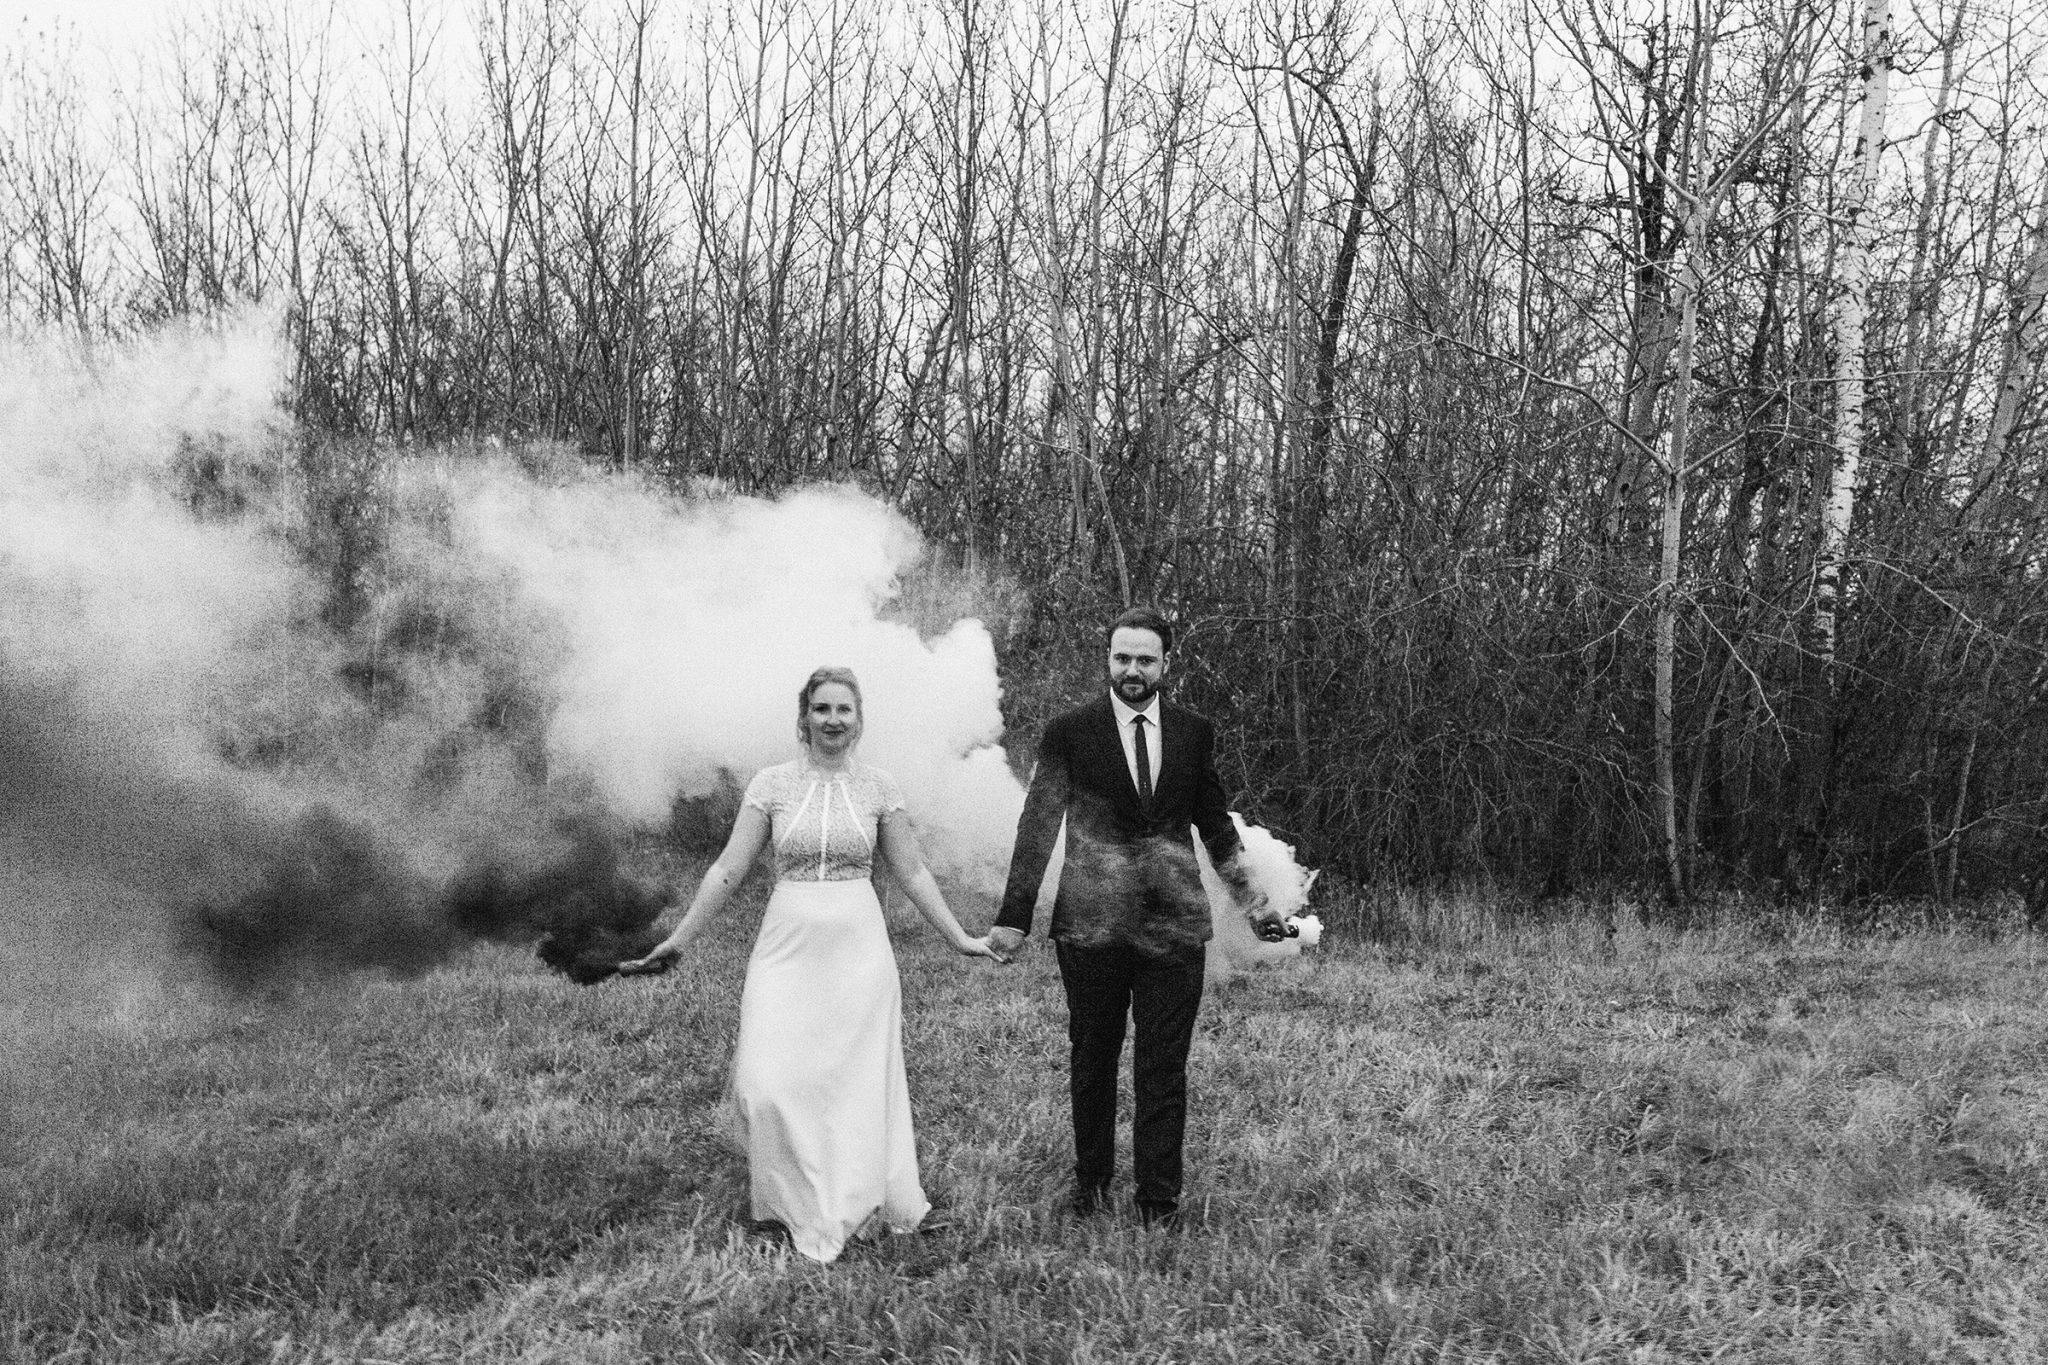 Black and white portrait of a bride and groom with smoke bombs in an autumn field